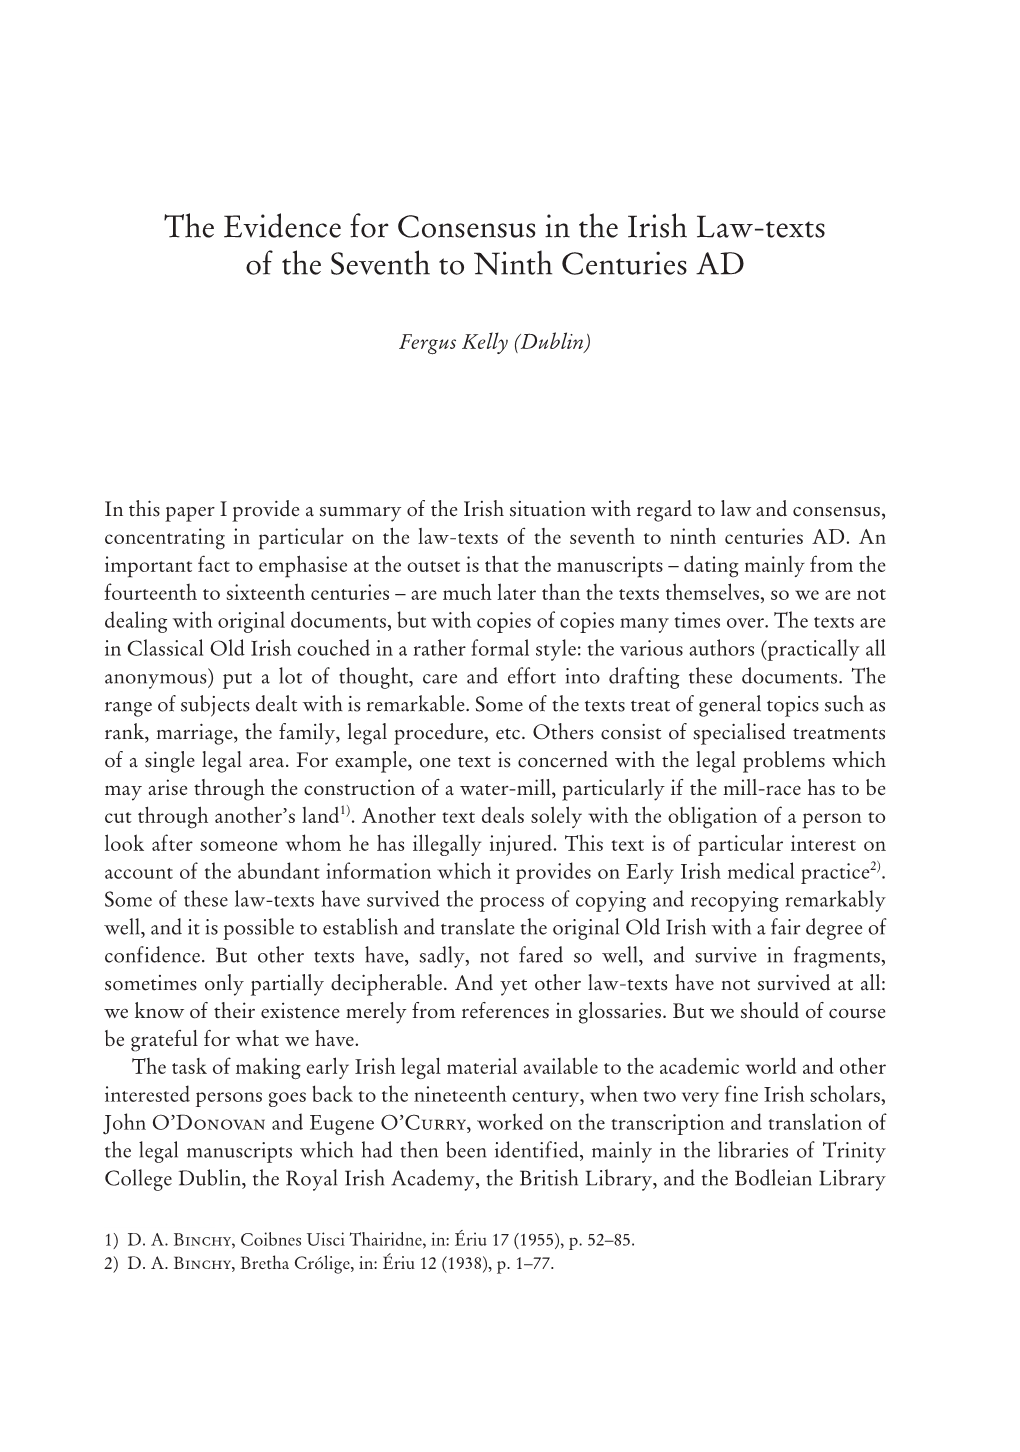 The Evidence for Consensus in the Irish Law-Texts of the Seventh to Ninth Centuries AD